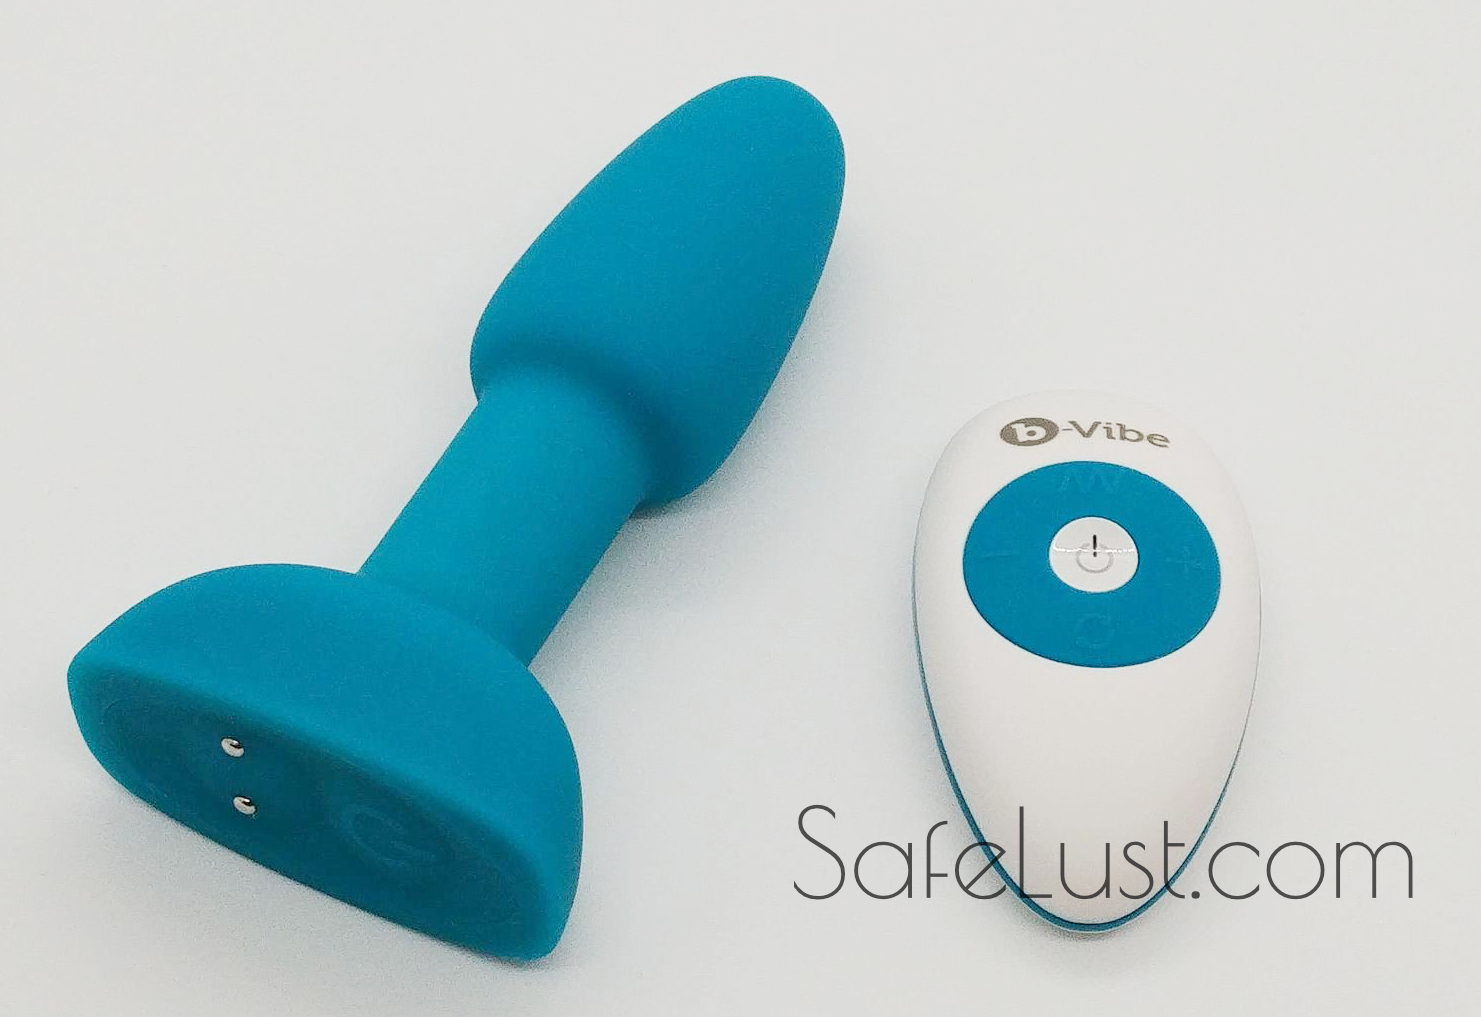 B-Vibe Rimming Plug Petite: Remote Controlled Butt Plug Review